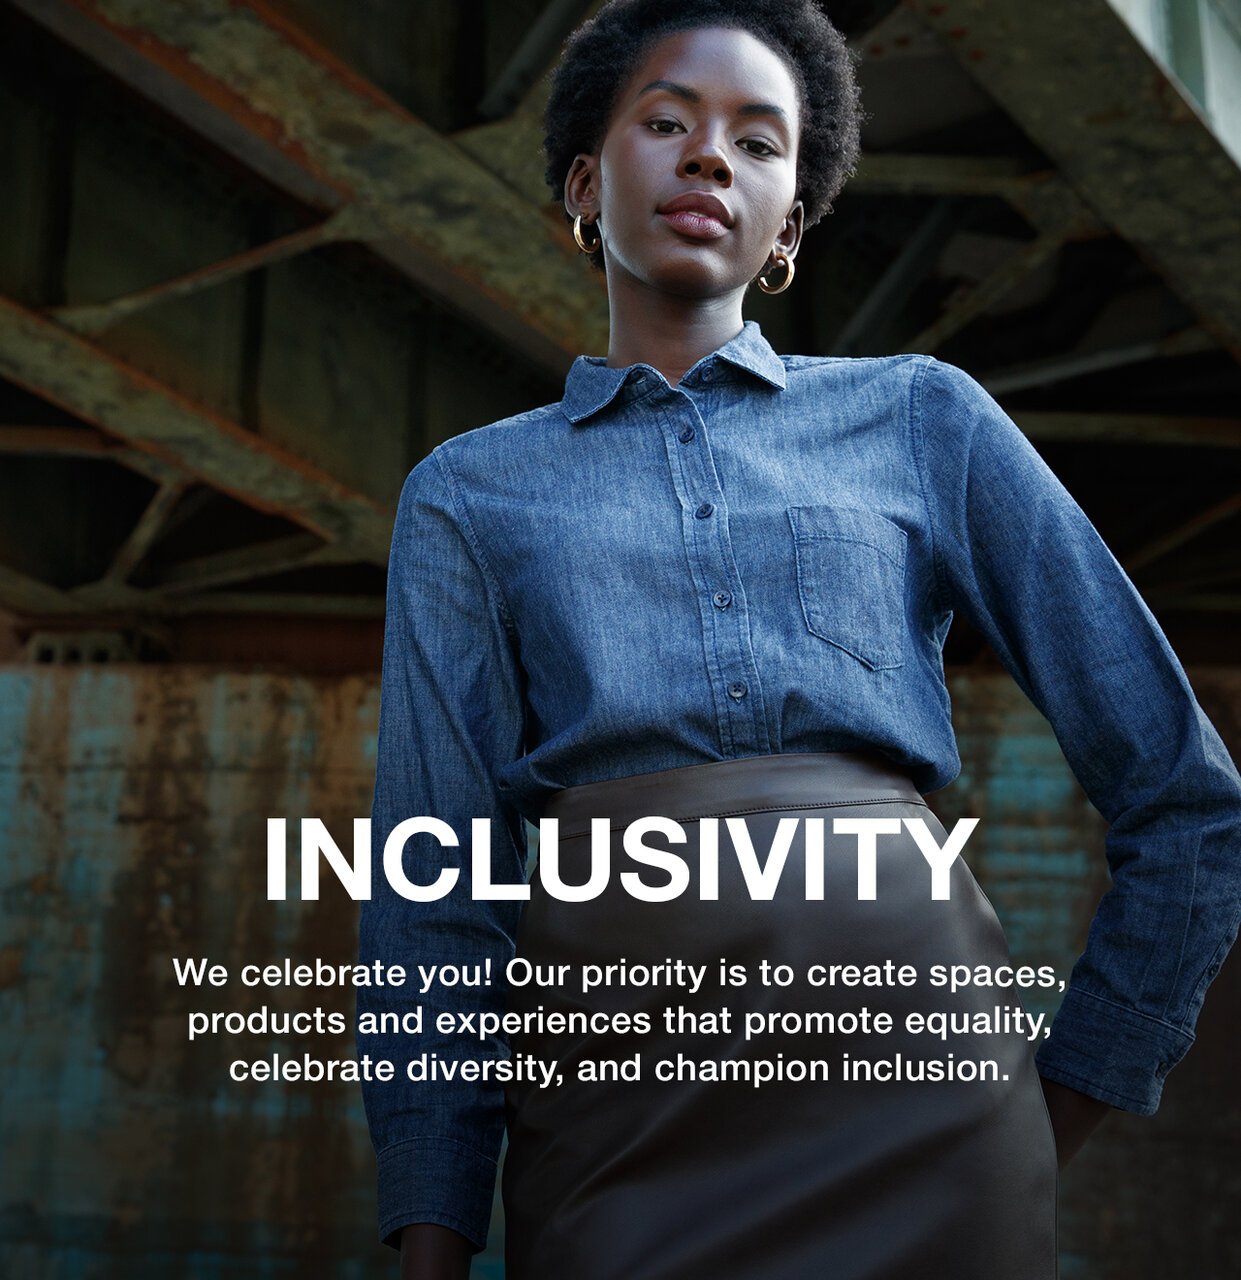 Inclusivity - We celebrate you! Our priority is to create spaces, products and experiences that promote equality, celebrate diversity, and champion inclusion.